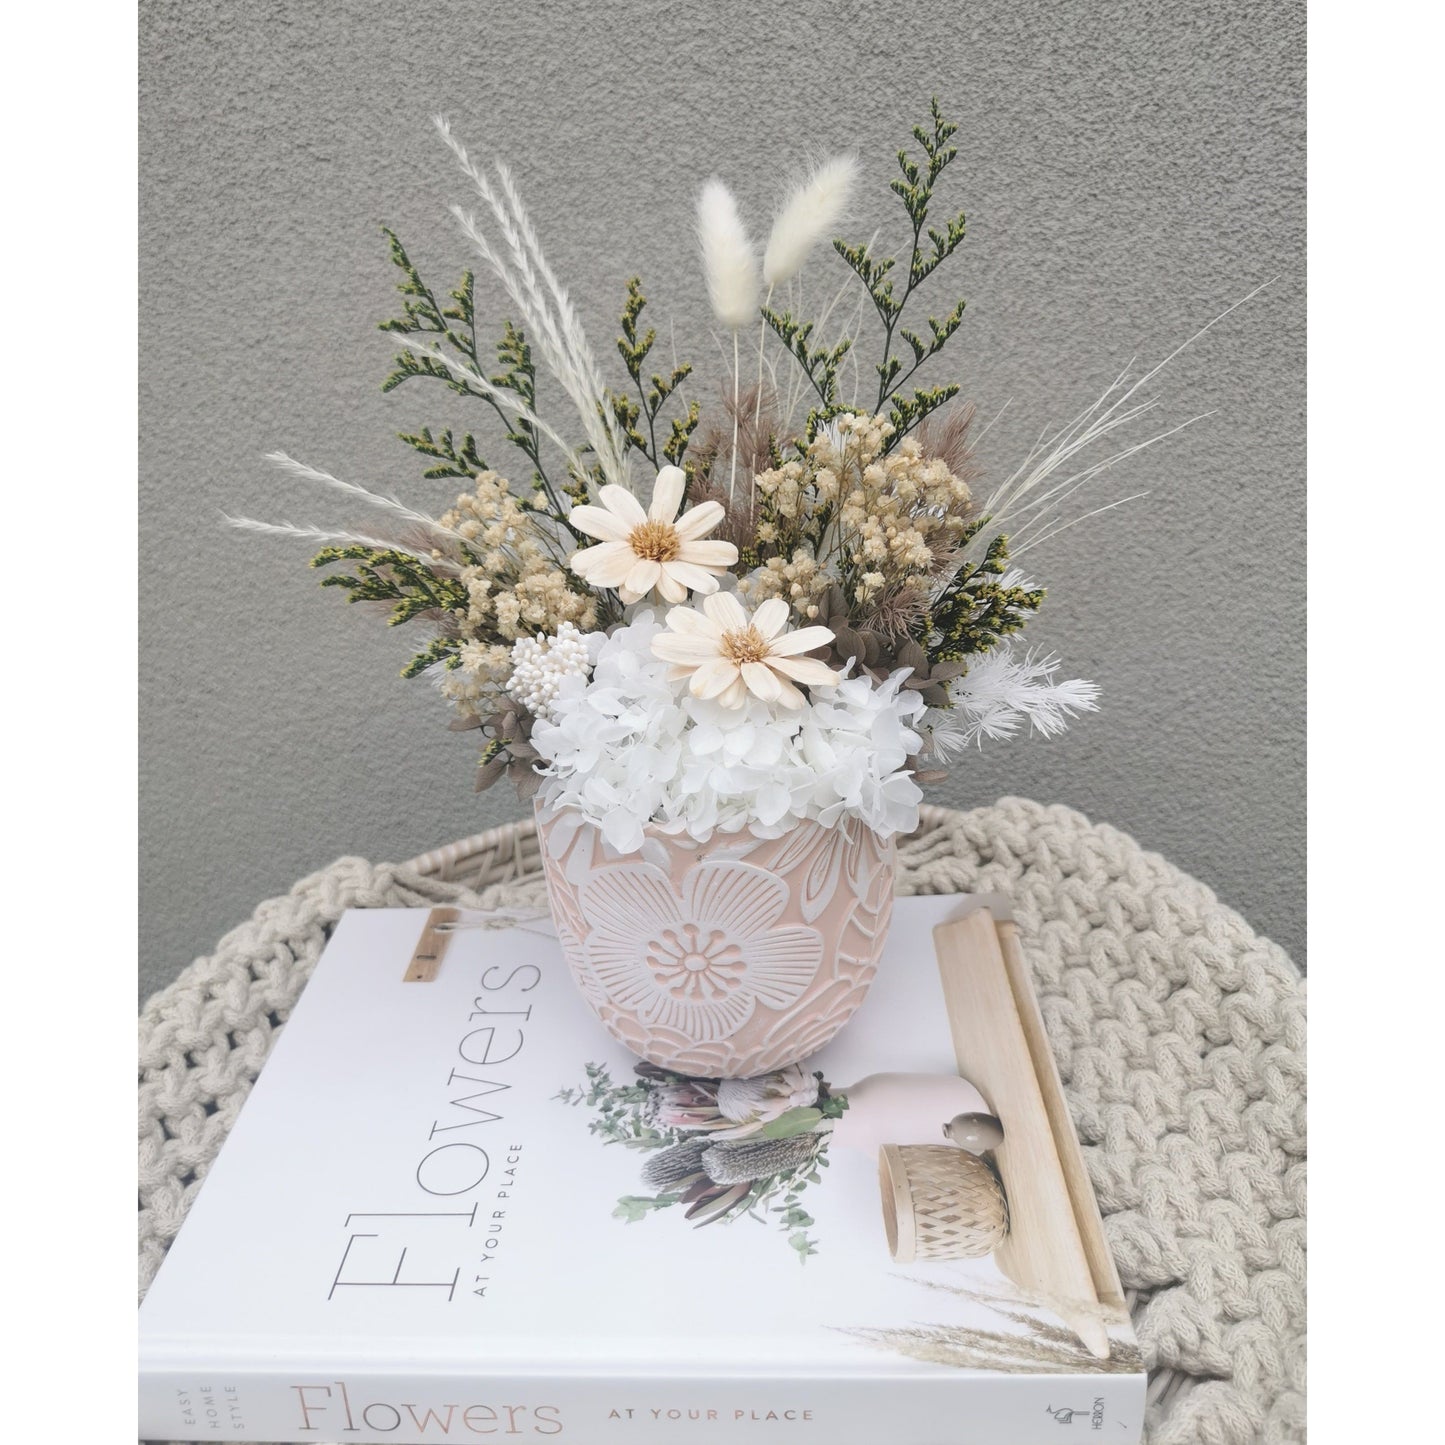 Dried & Preserved flowers in neutral green, white & brown colours in pink & white floral pattern pot. Picture shows arrangement sitting on a book against a blank wall